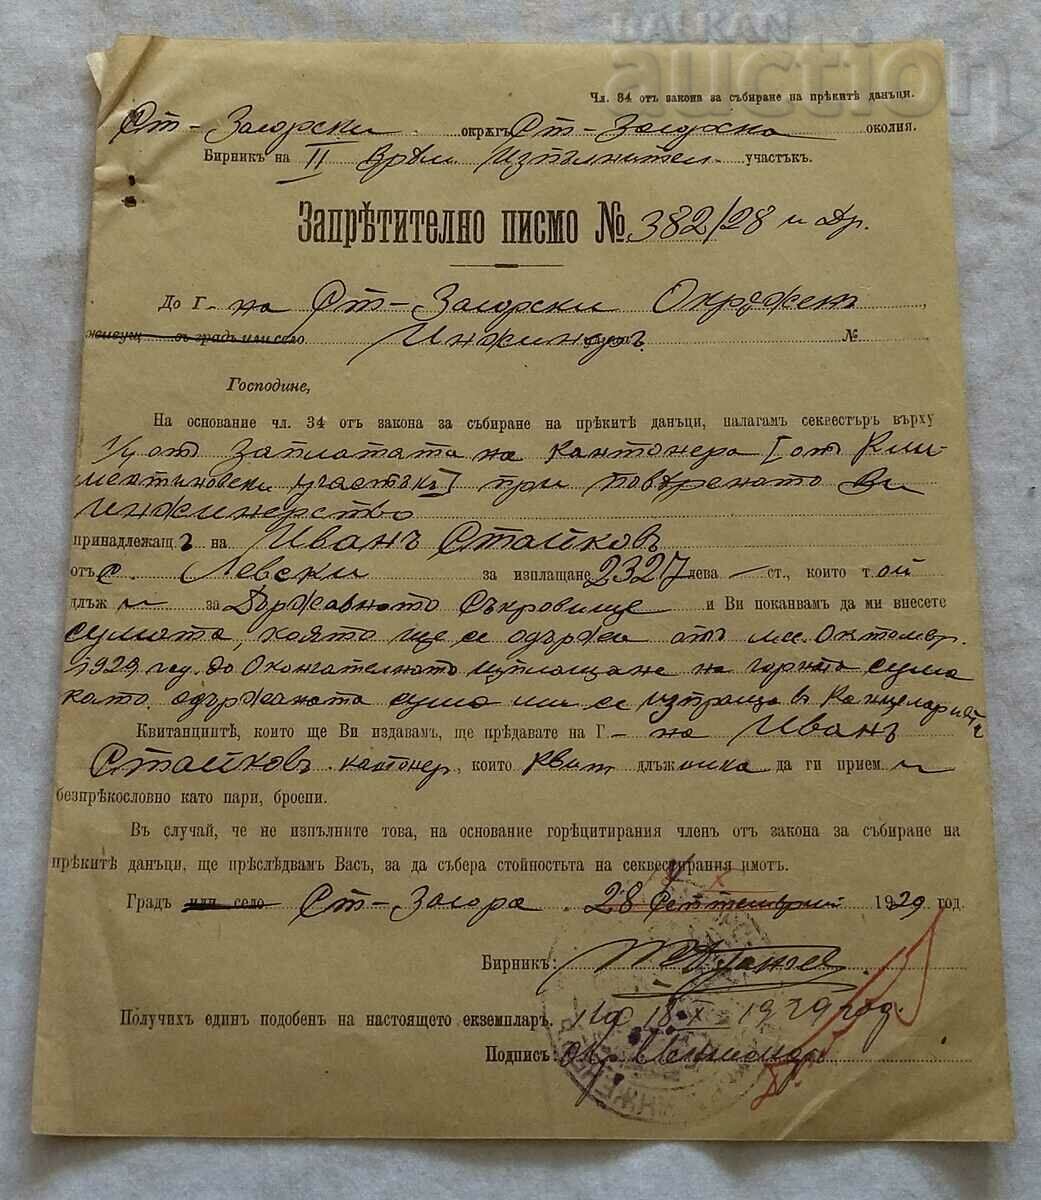 WARNING LETTER TOLL COLLECTOR 1929 S. LEVSKI ST. ZAGORA